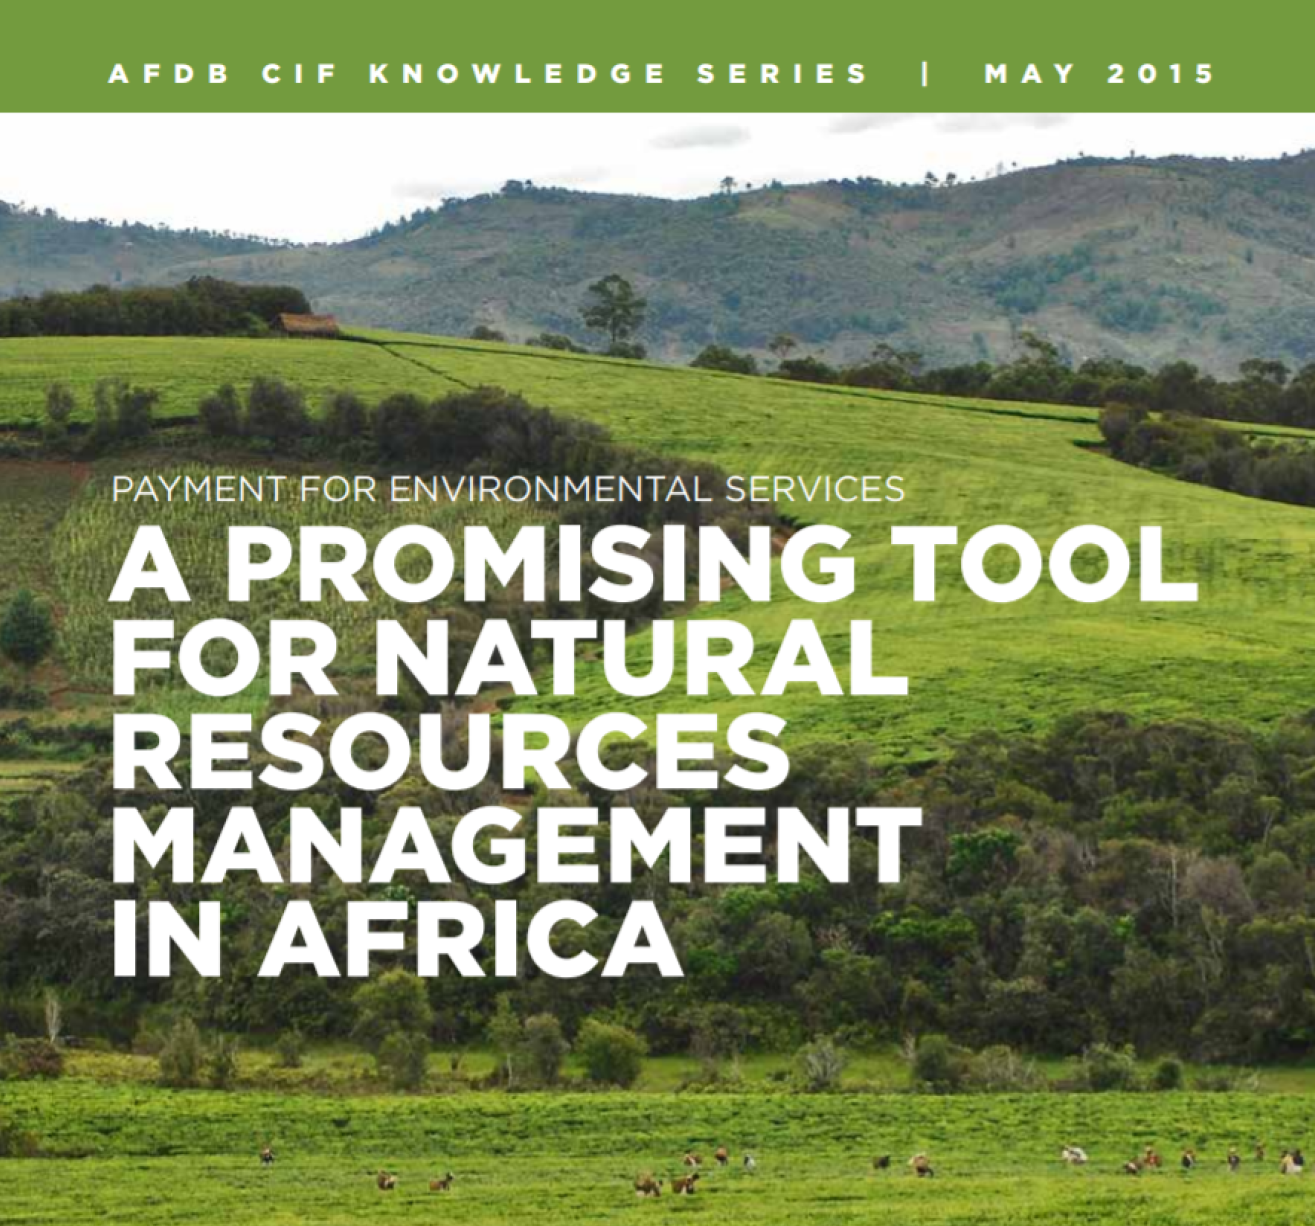 Payment for environmental services – A promising tool for natural resource management in Africa